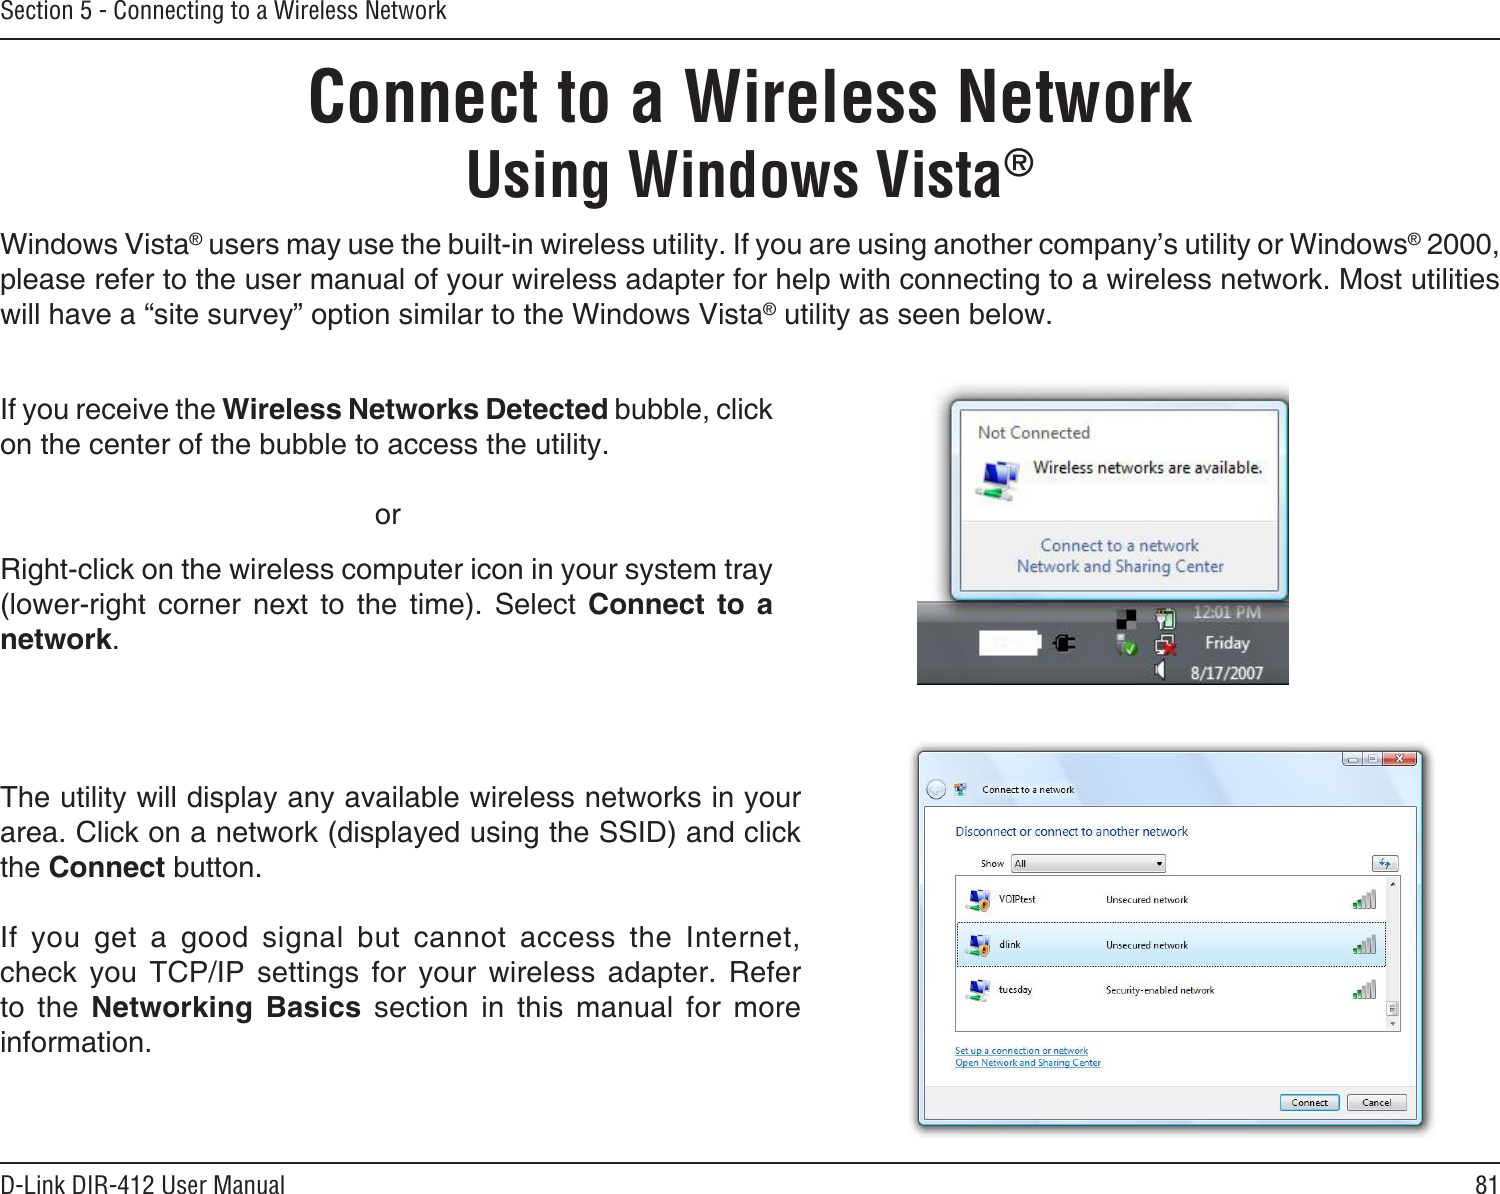 81D-Link DIR-412 User ManualSection 5 - Connecting to a Wireless NetworkConnect to a Wireless NetworkUsing Windows Vista®Windows Vista® users may use the built-in wireless utility. If you are using another company’s utility or Windows® 2000, please refer to the user manual of your wireless adapter for help with connecting to a wireless network. Most utilities will have a “site survey” option similar to the Windows Vista® utility as seen below.Right-click on the wireless computer icon in your system tray (lower-right  corner  next  to  the  time).  Select  Connect  to  a network.If you receive the Wireless Networks Detected bubble, click on the center of the bubble to access the utility.     orThe utility will display any available wireless networks in your area. Click on a network (displayed using the SSID) and click the Connect button.If  you  get  a  good  signal  but  cannot  access  the  Internet, check  you  TCP/IP  settings  for  your  wireless  adapter.  Refer to  the  Networking  Basics  section  in  this  manual  for  more information.